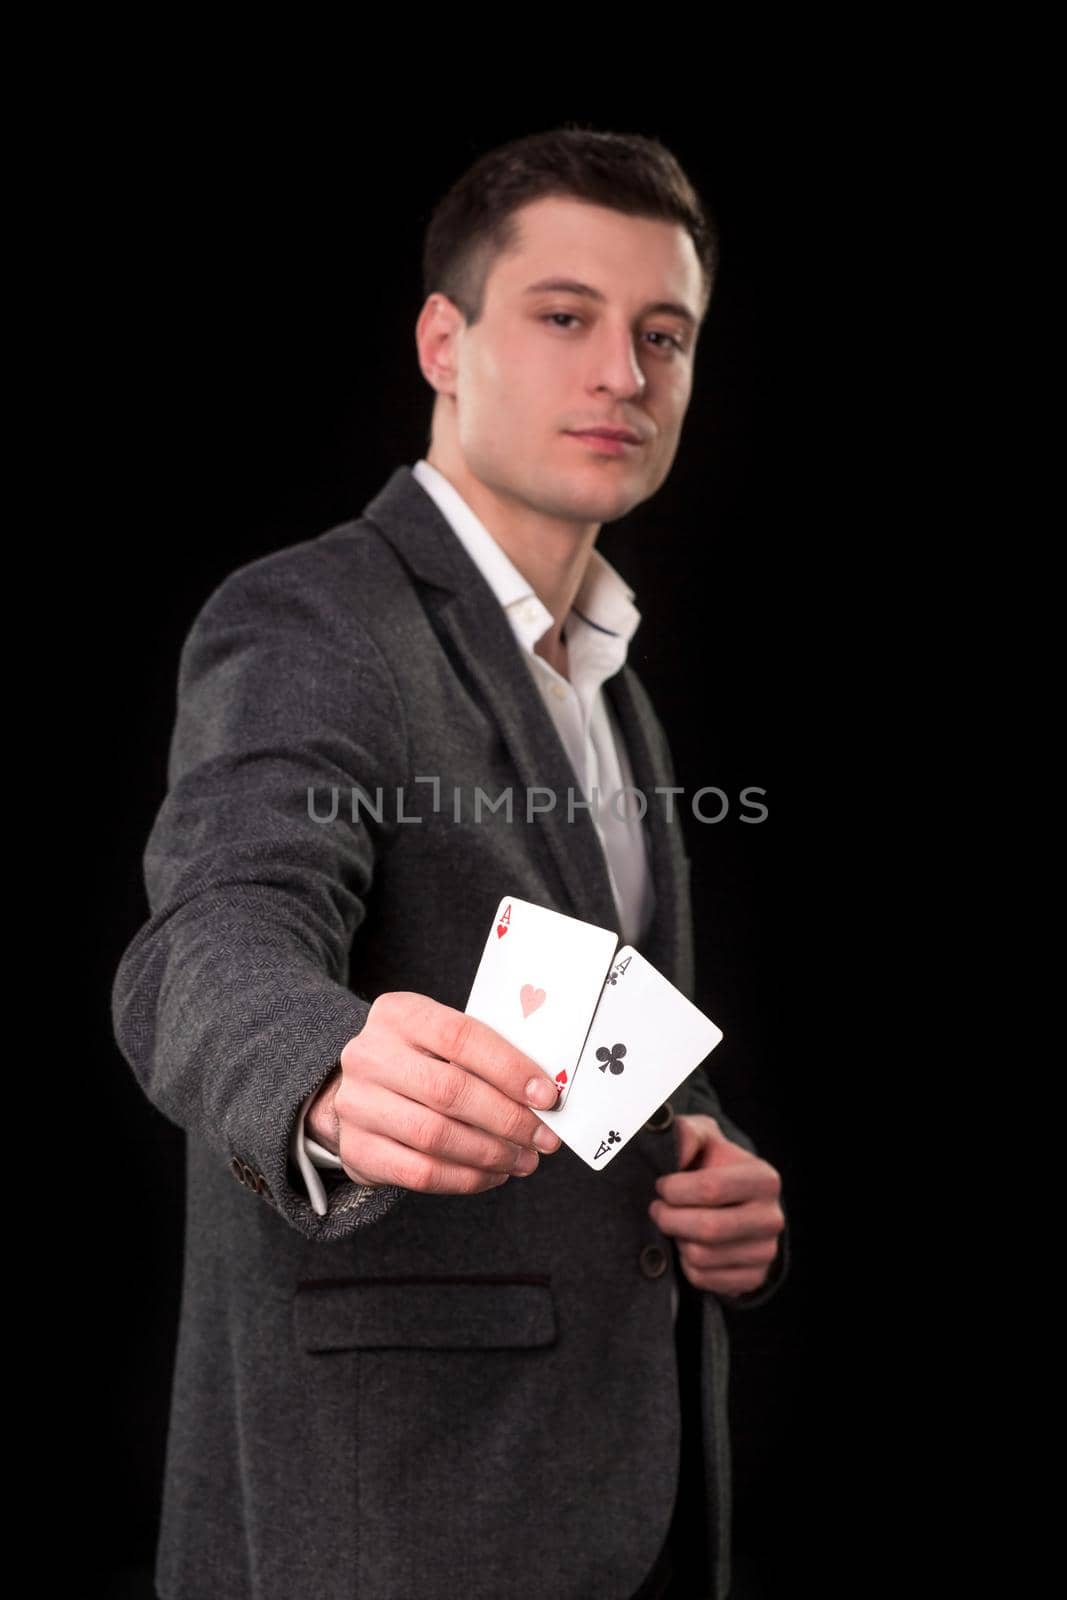 Young caucasian man wearing suit holding two aces in his hand on black background. Gambling concept. Casino by nazarovsergey